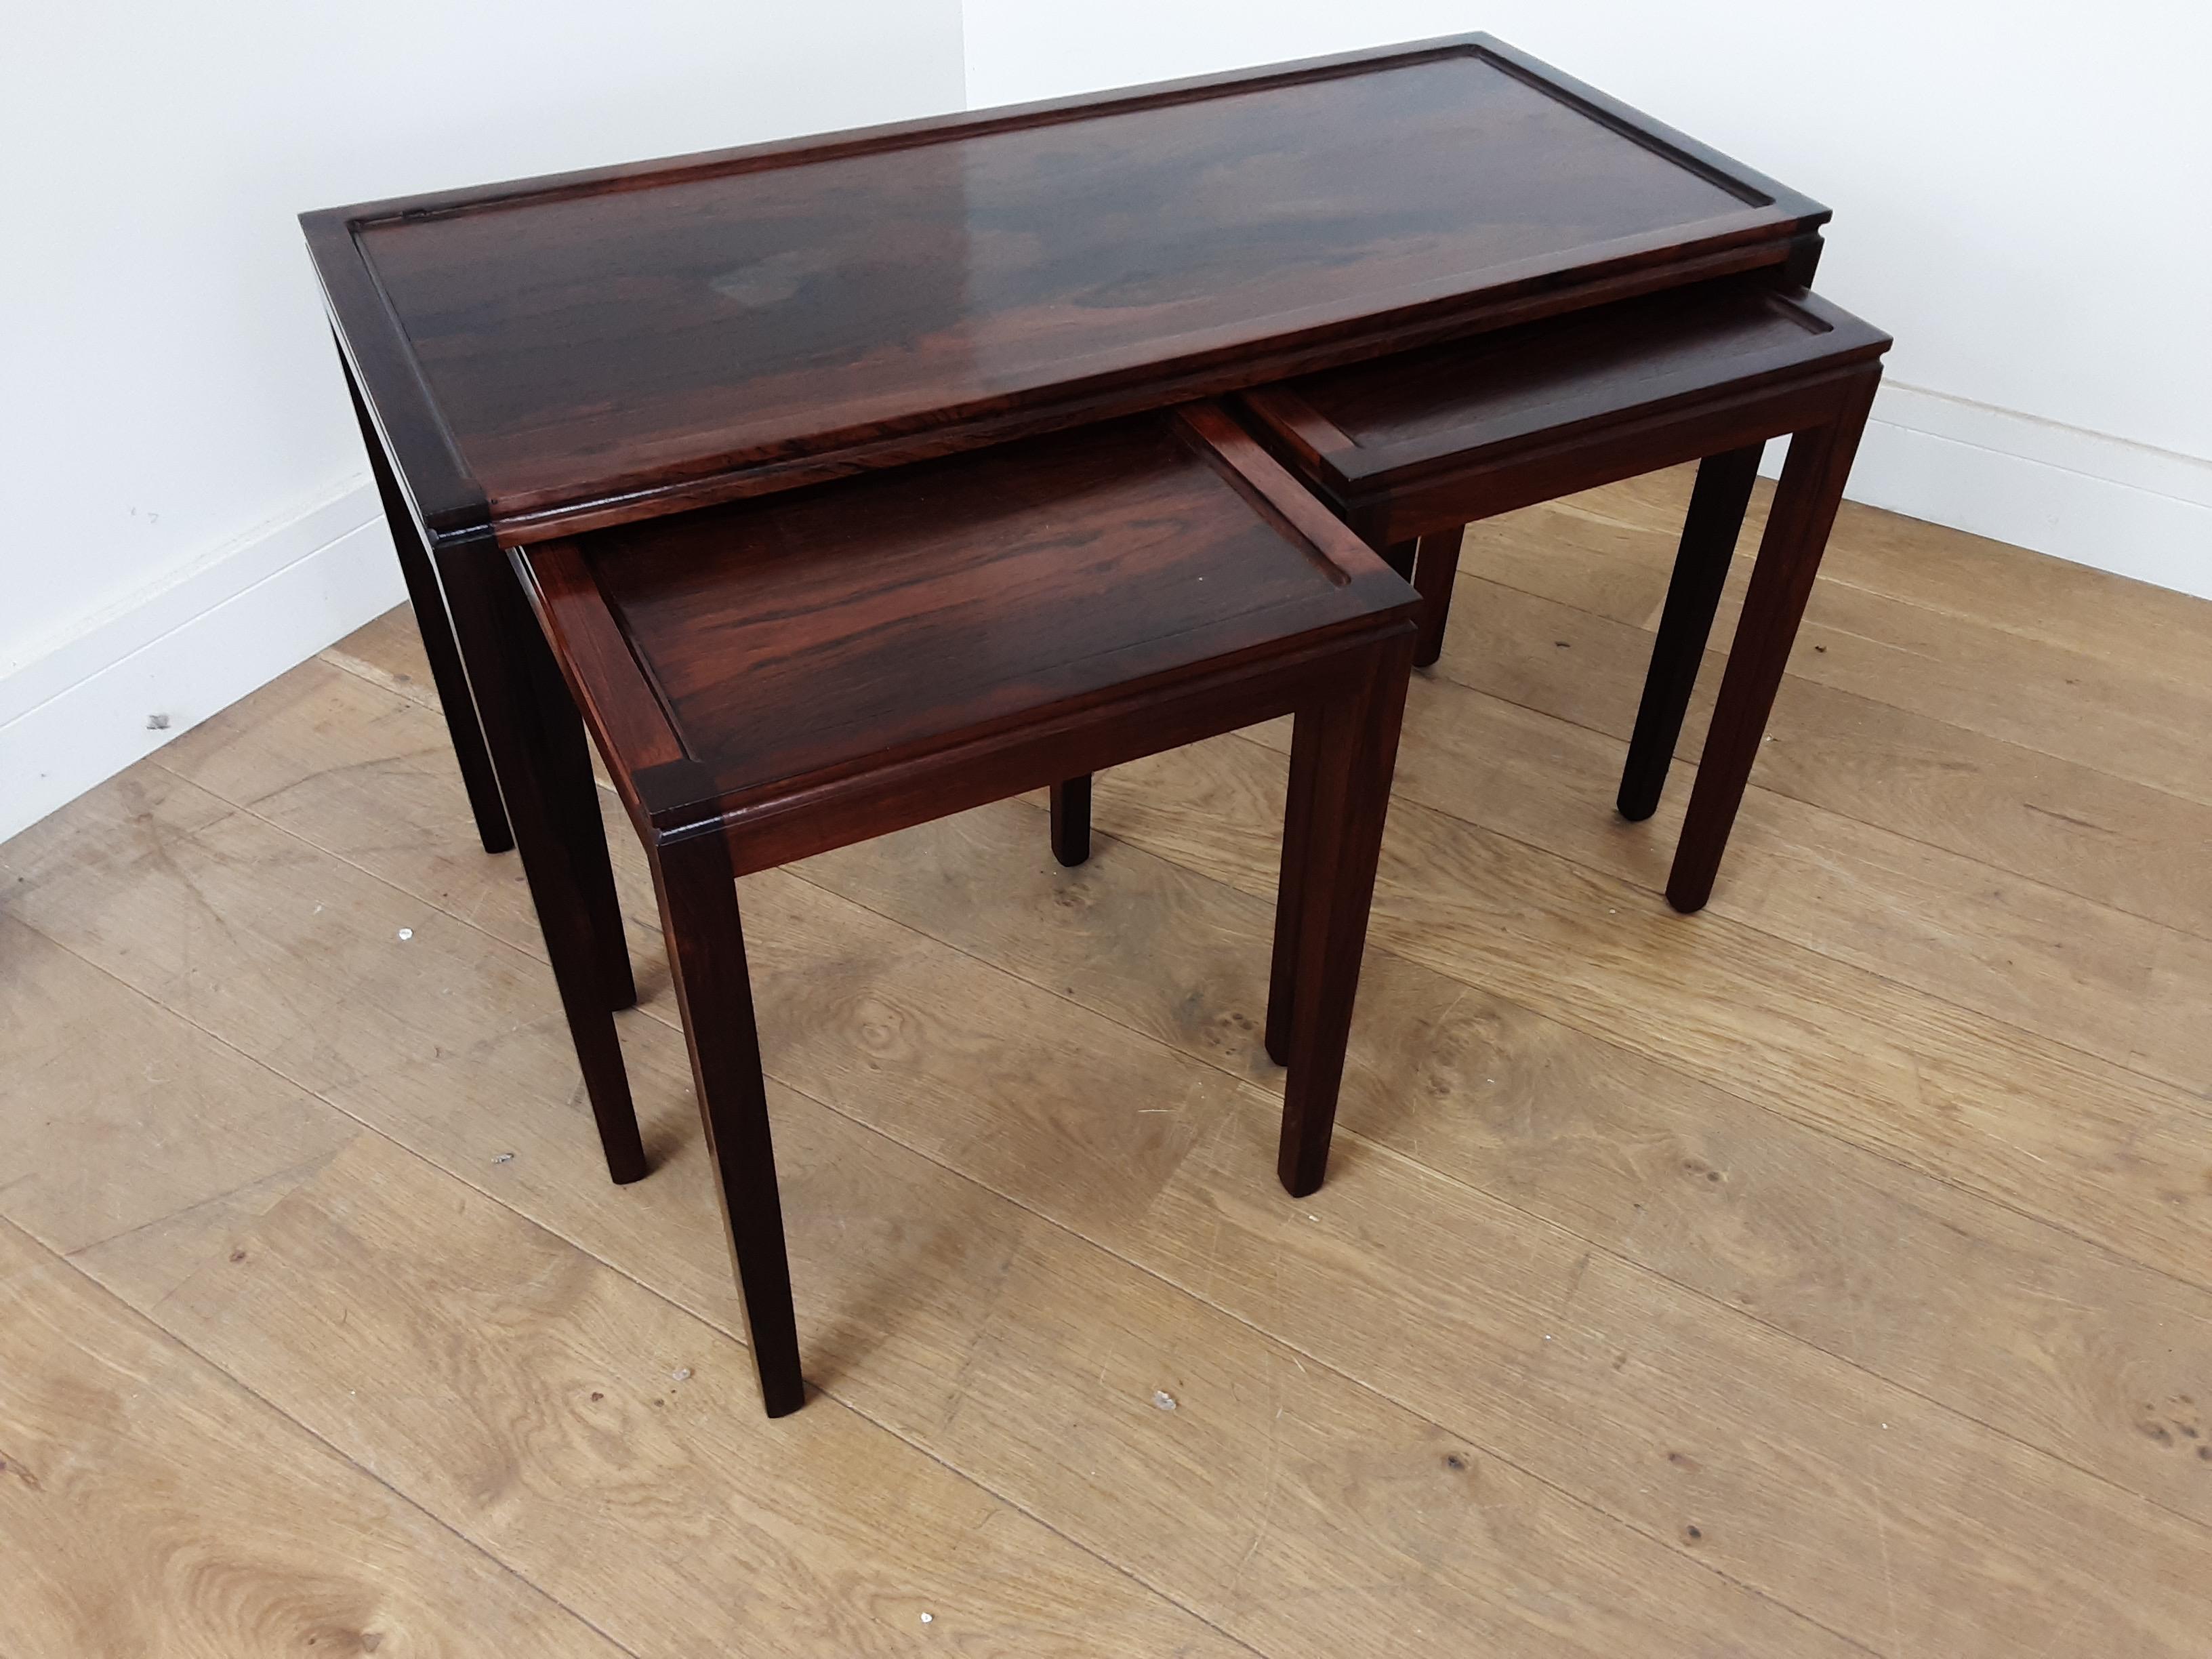 Midcentury Nest of Tables in Deep Brown Figured Rosewood circa 1960 from Denmark For Sale 1